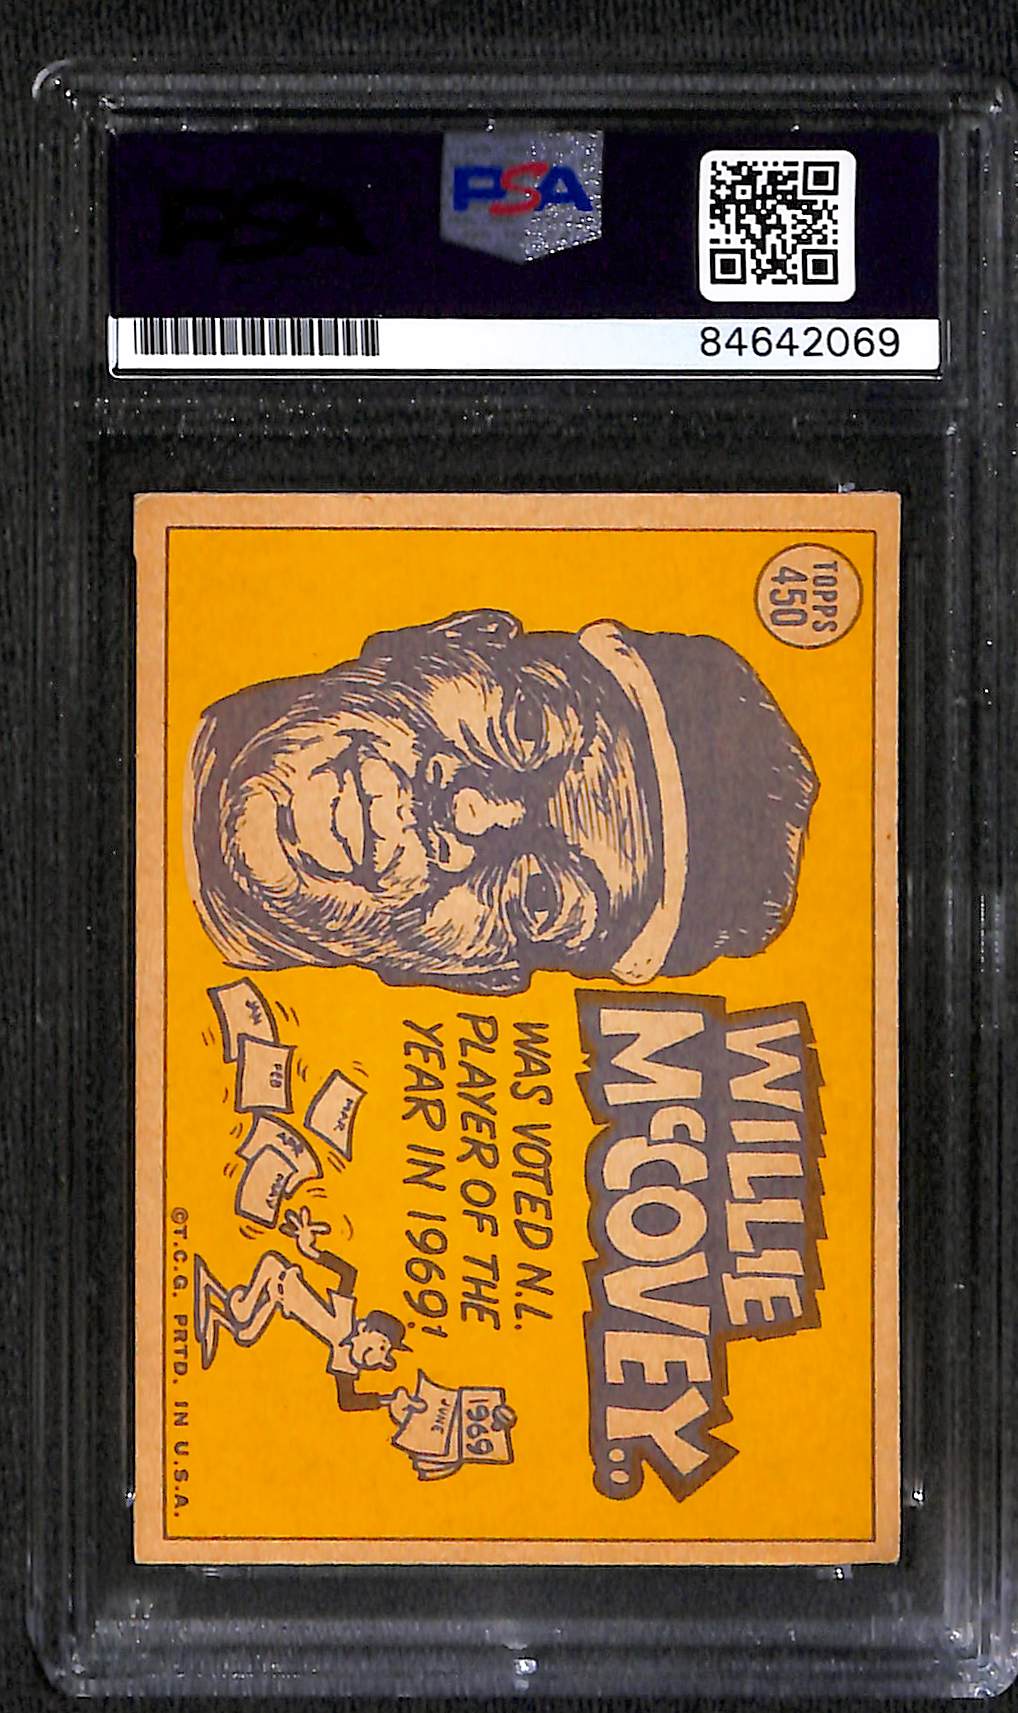 1970 TOPPS WILLIE MCCOVEY SPORTING NEWS AUTO CARD PSA DNA (2069)